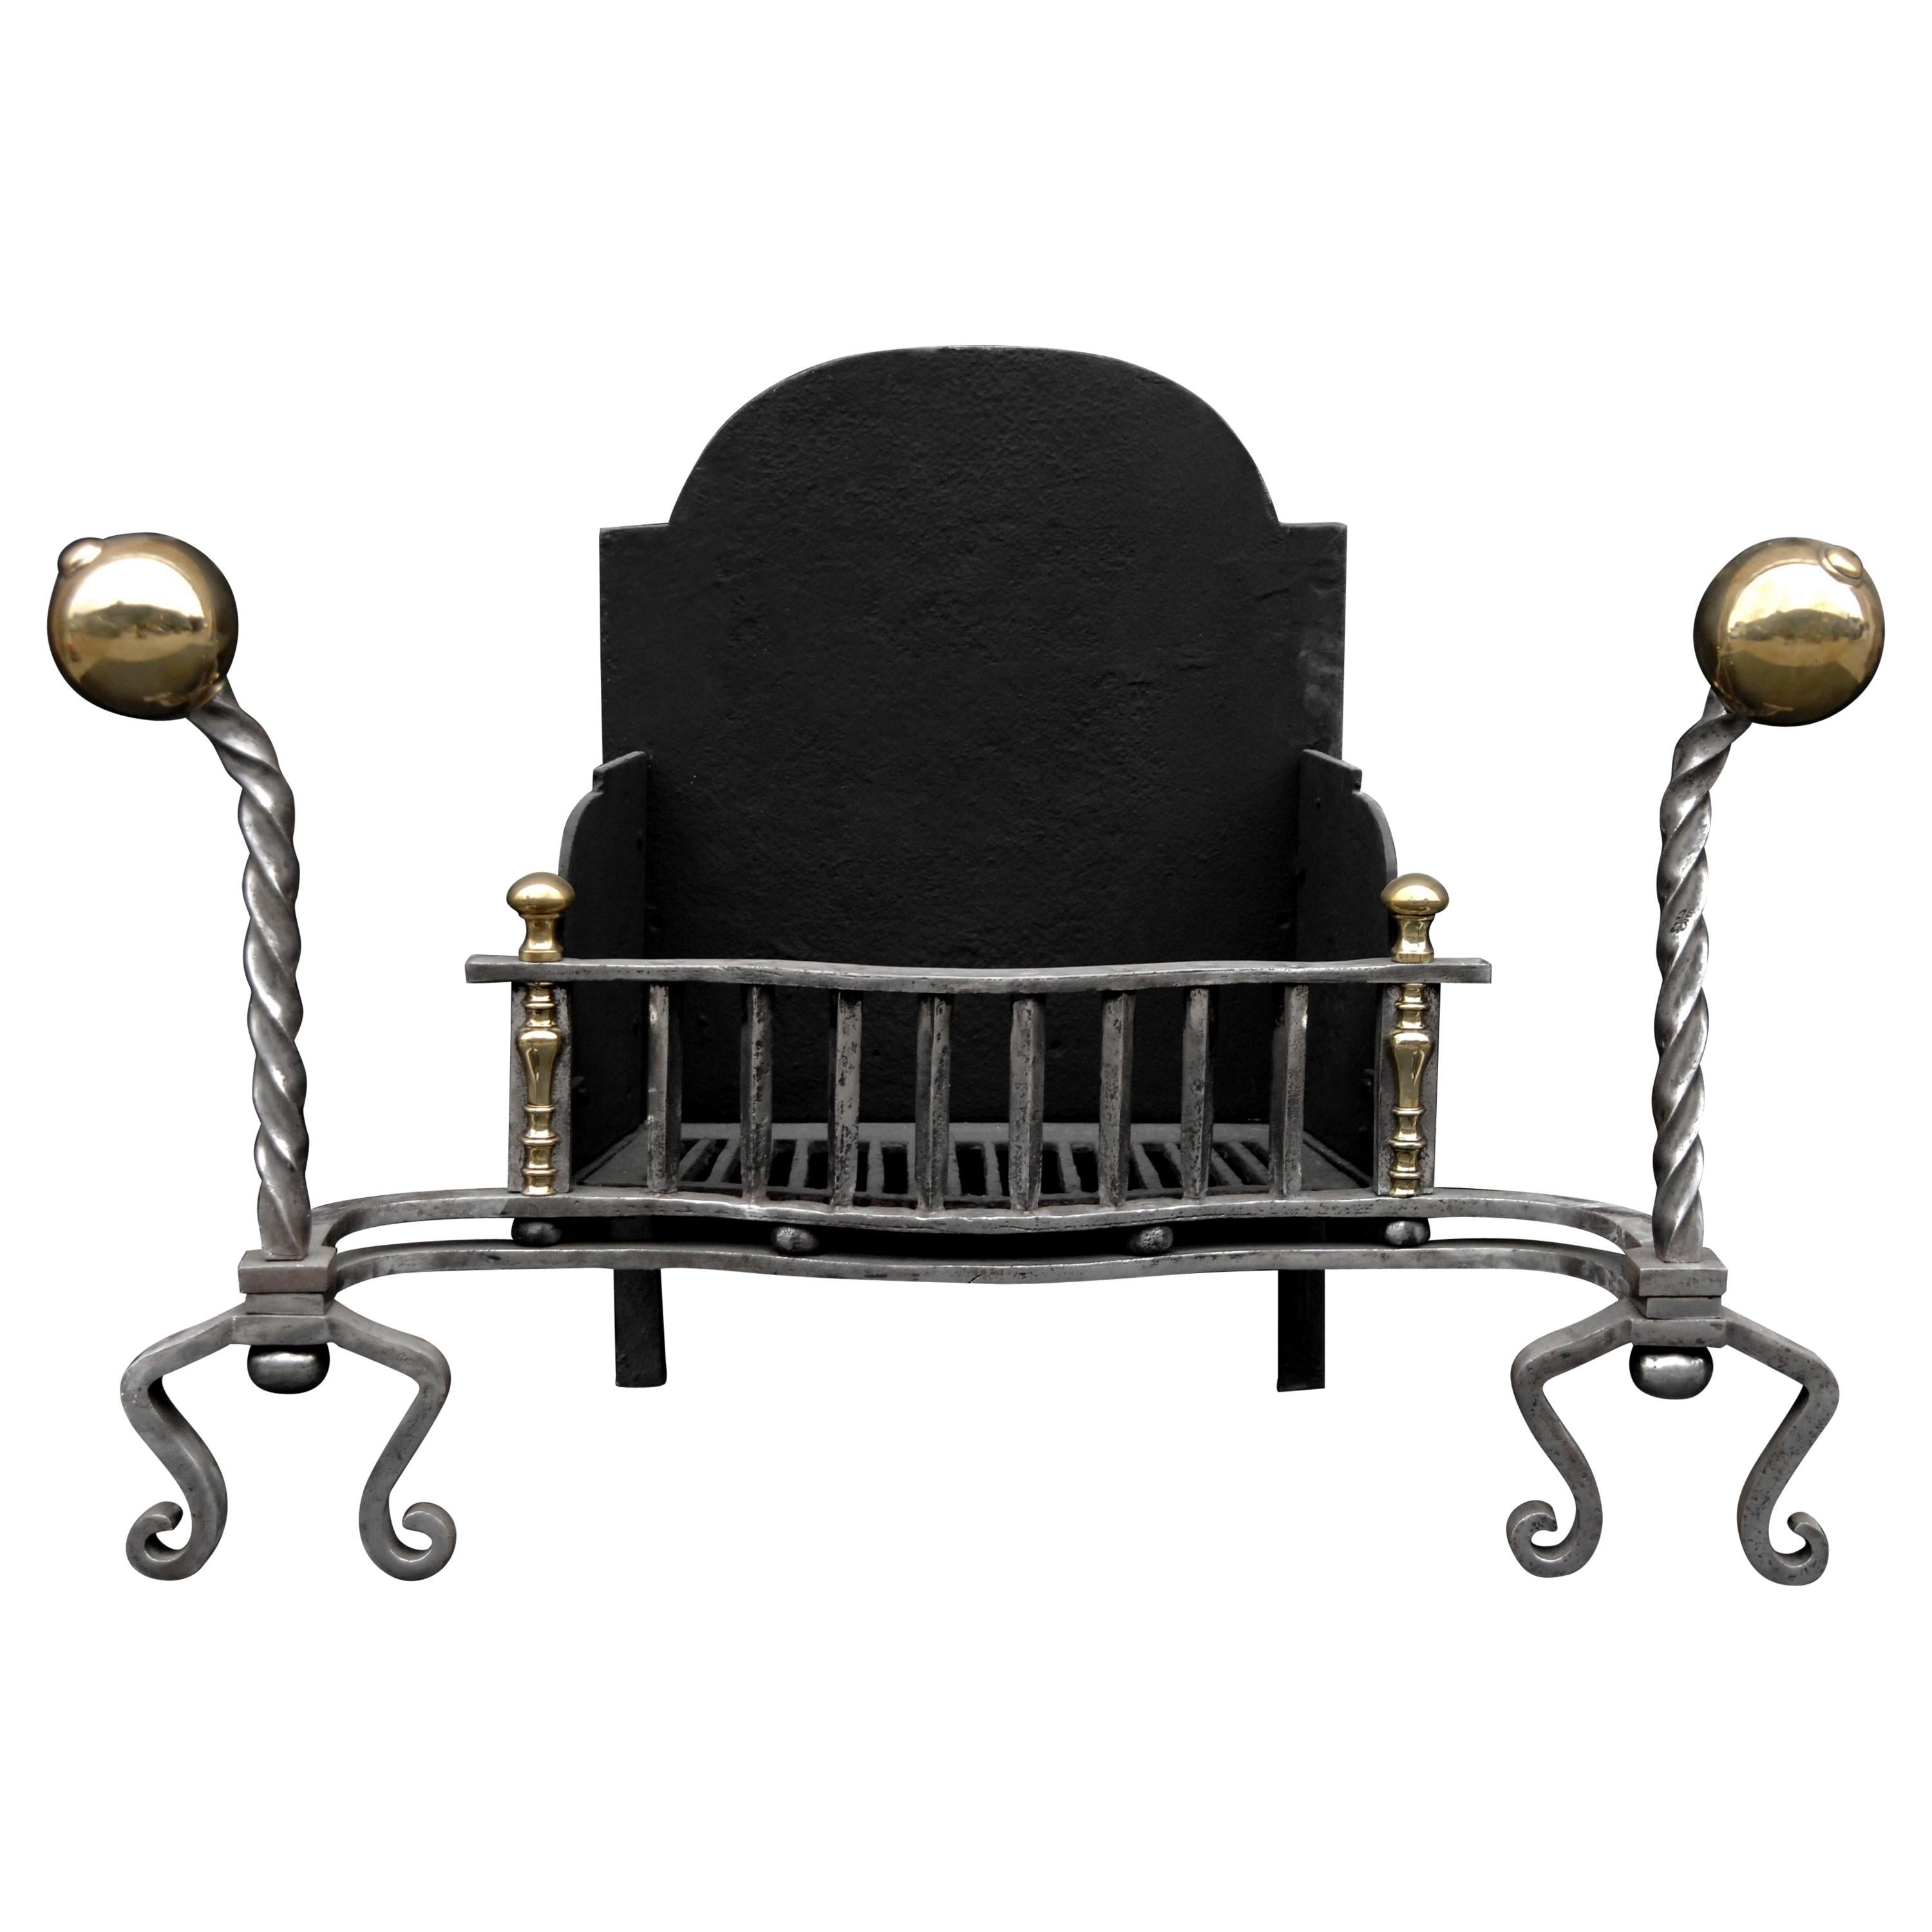 Prominent Mid 19th Century English Polished Wrought Iron Firegrate